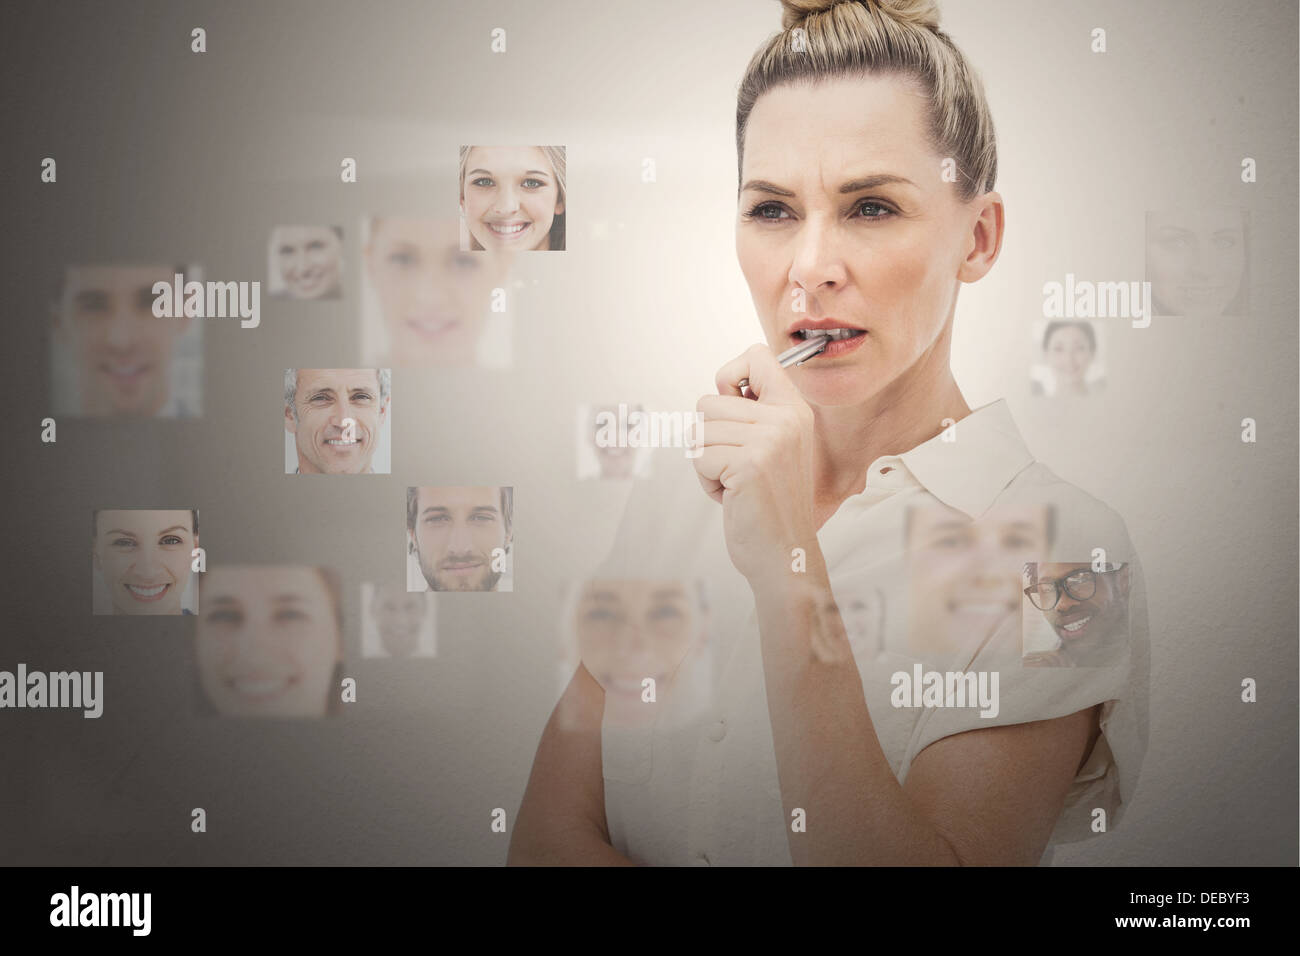 Stern businesswoman encircled by digital interface Stock Photo